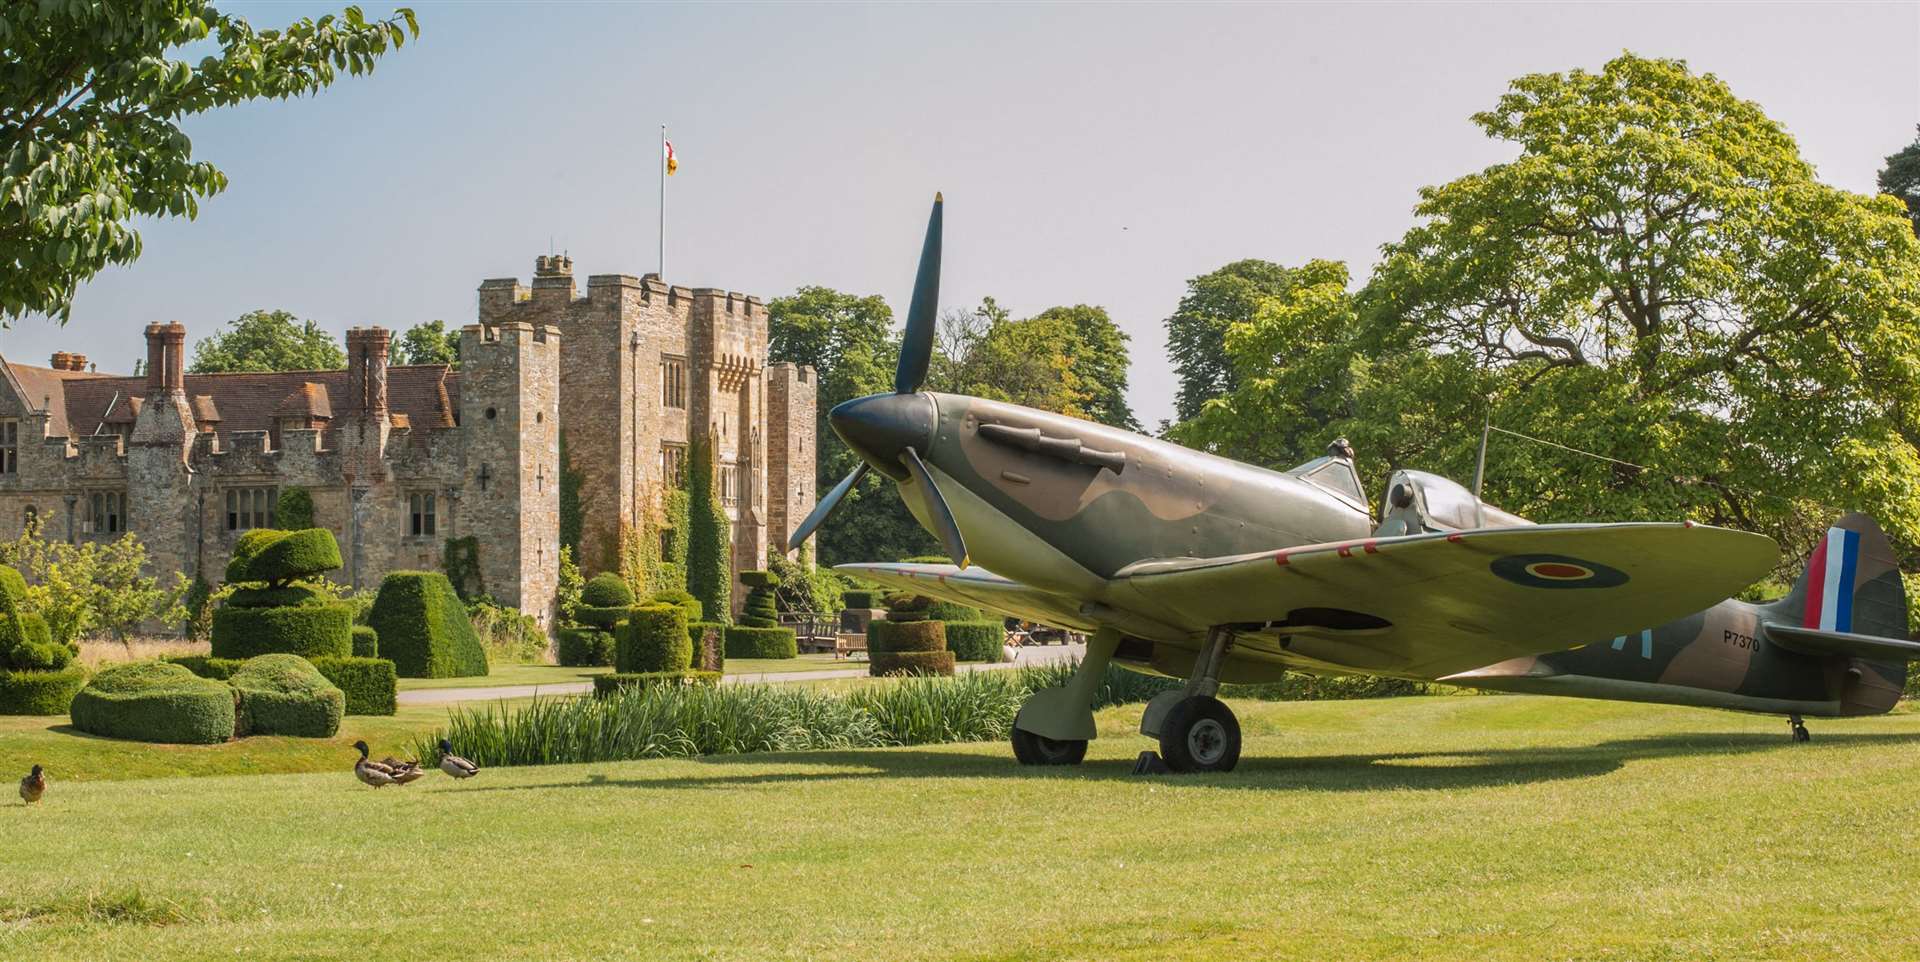 The Home Front weekend at Hever Castle includes a grounded life size Spitfire